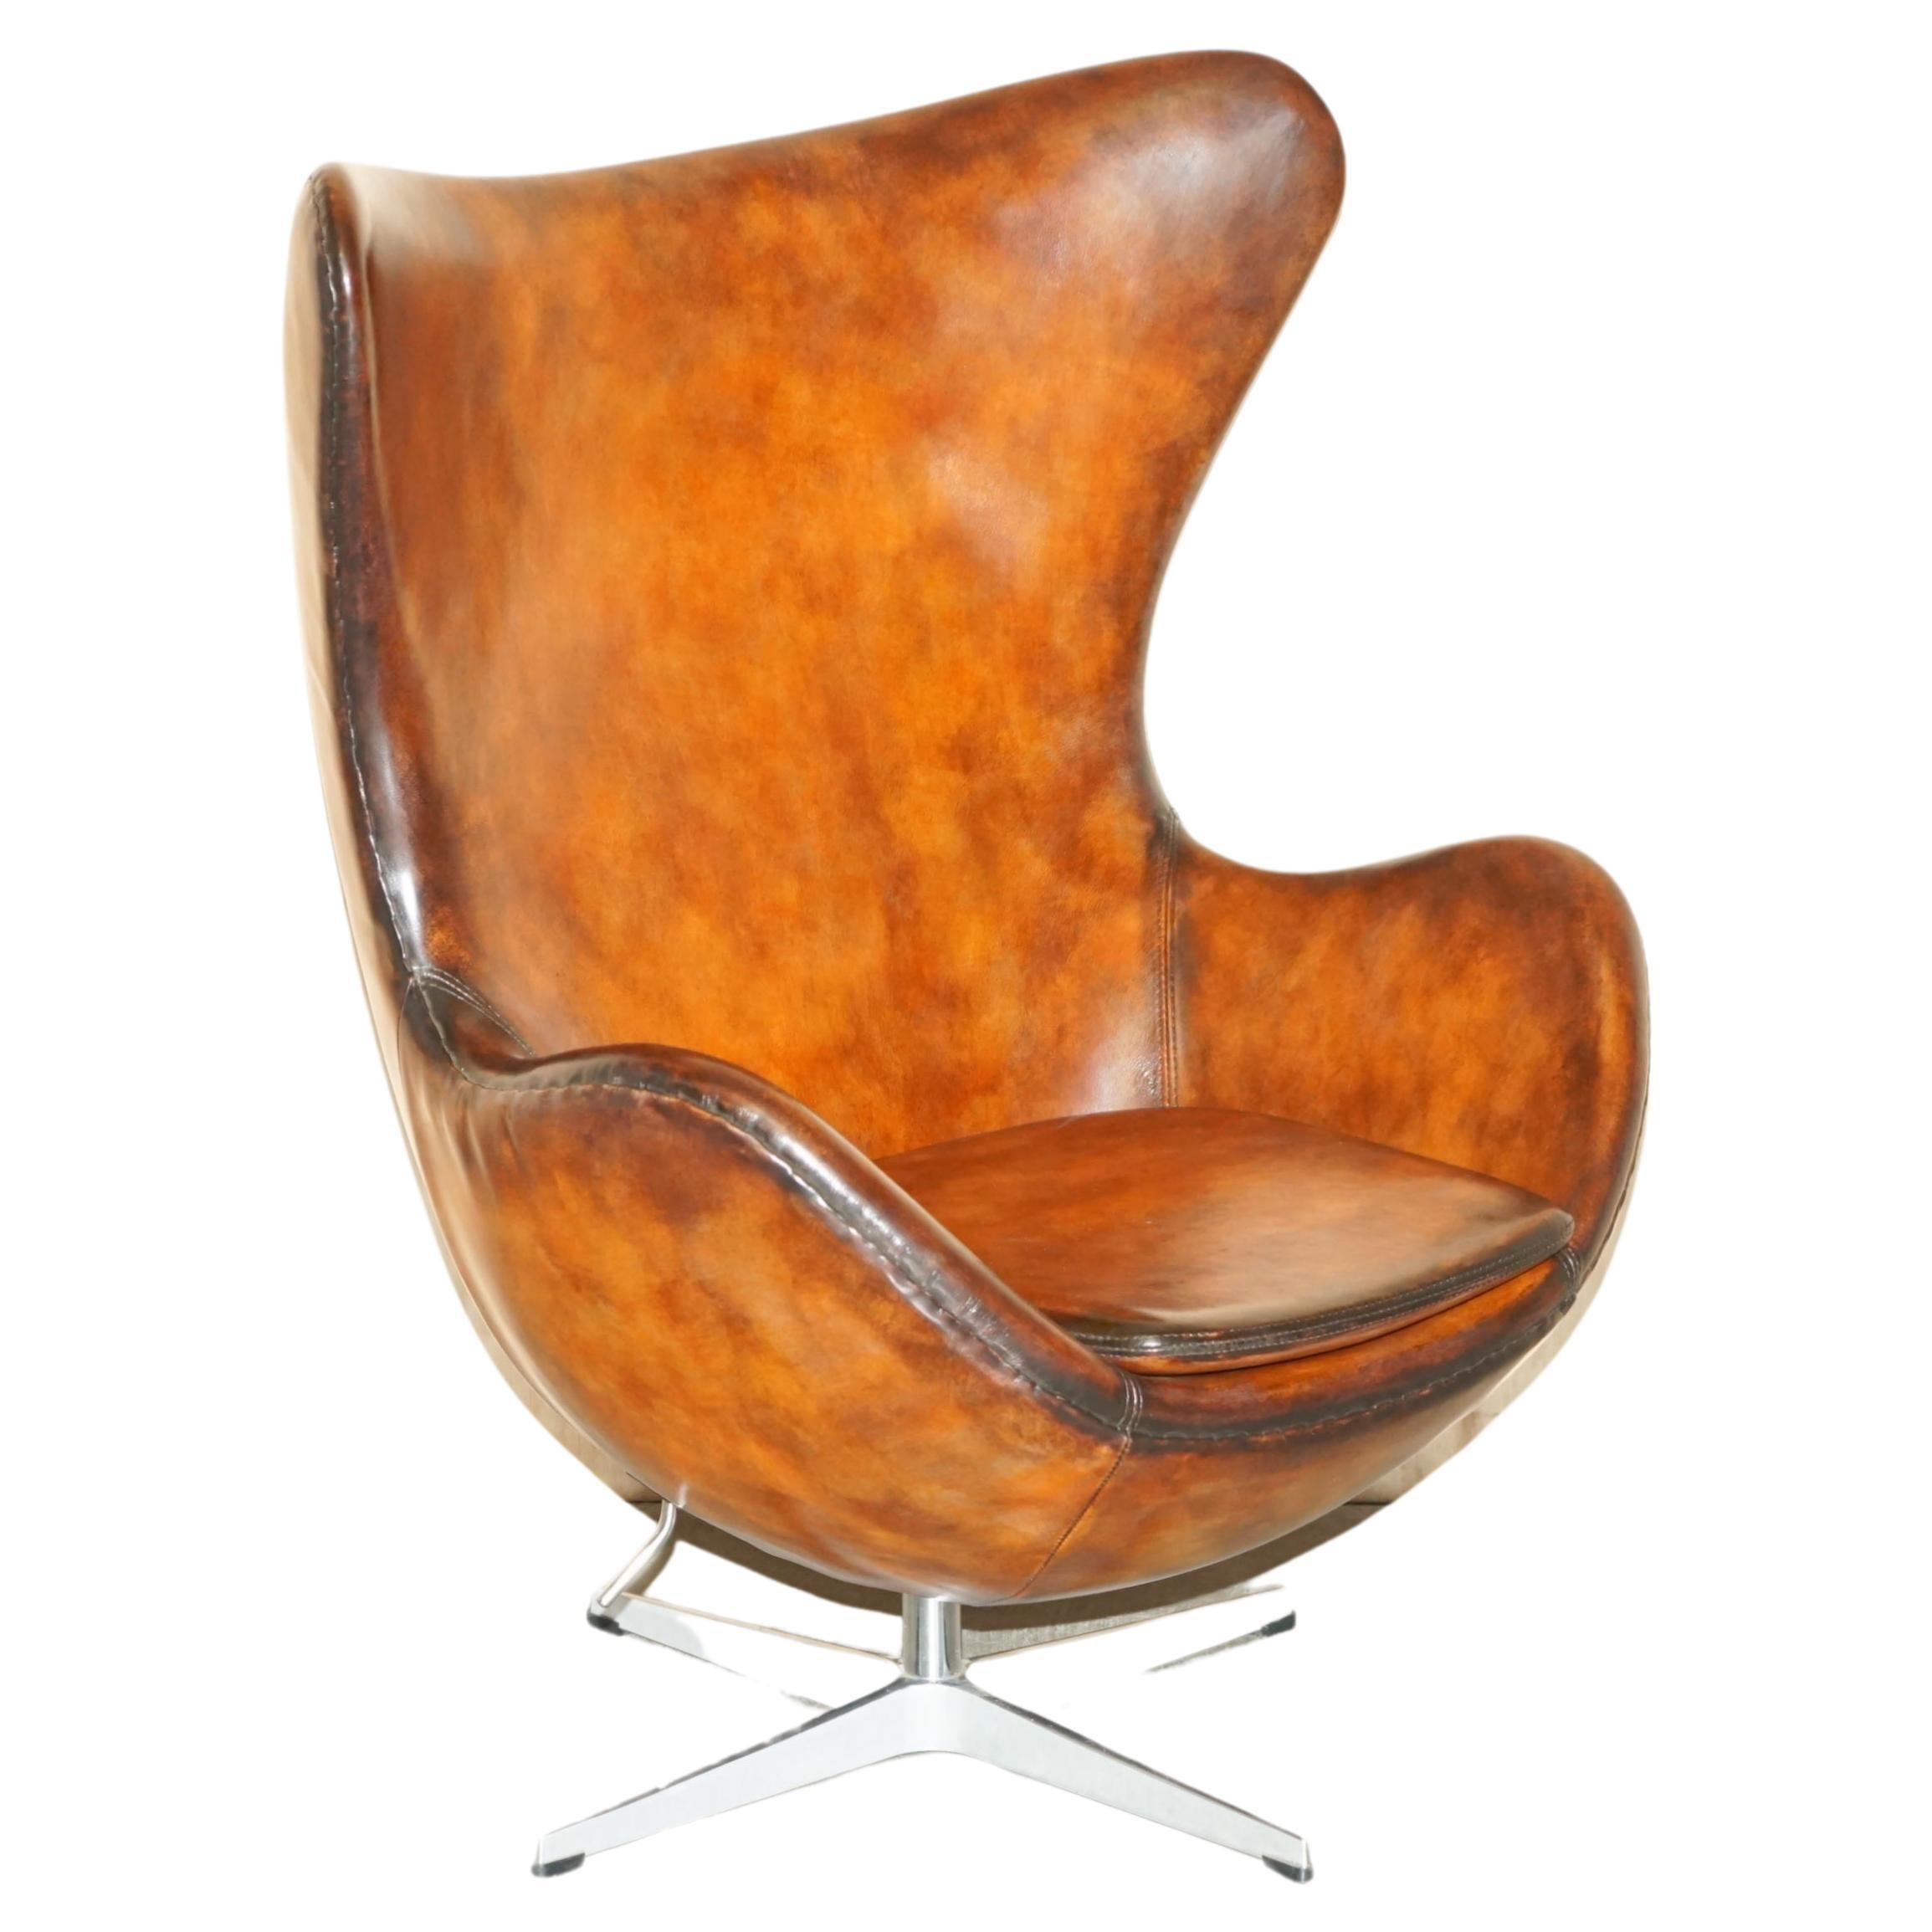 1 of 2 Vintage Fully Restored Fritz Hansen Style Egg Chair Whisky Brown Leather For Sale